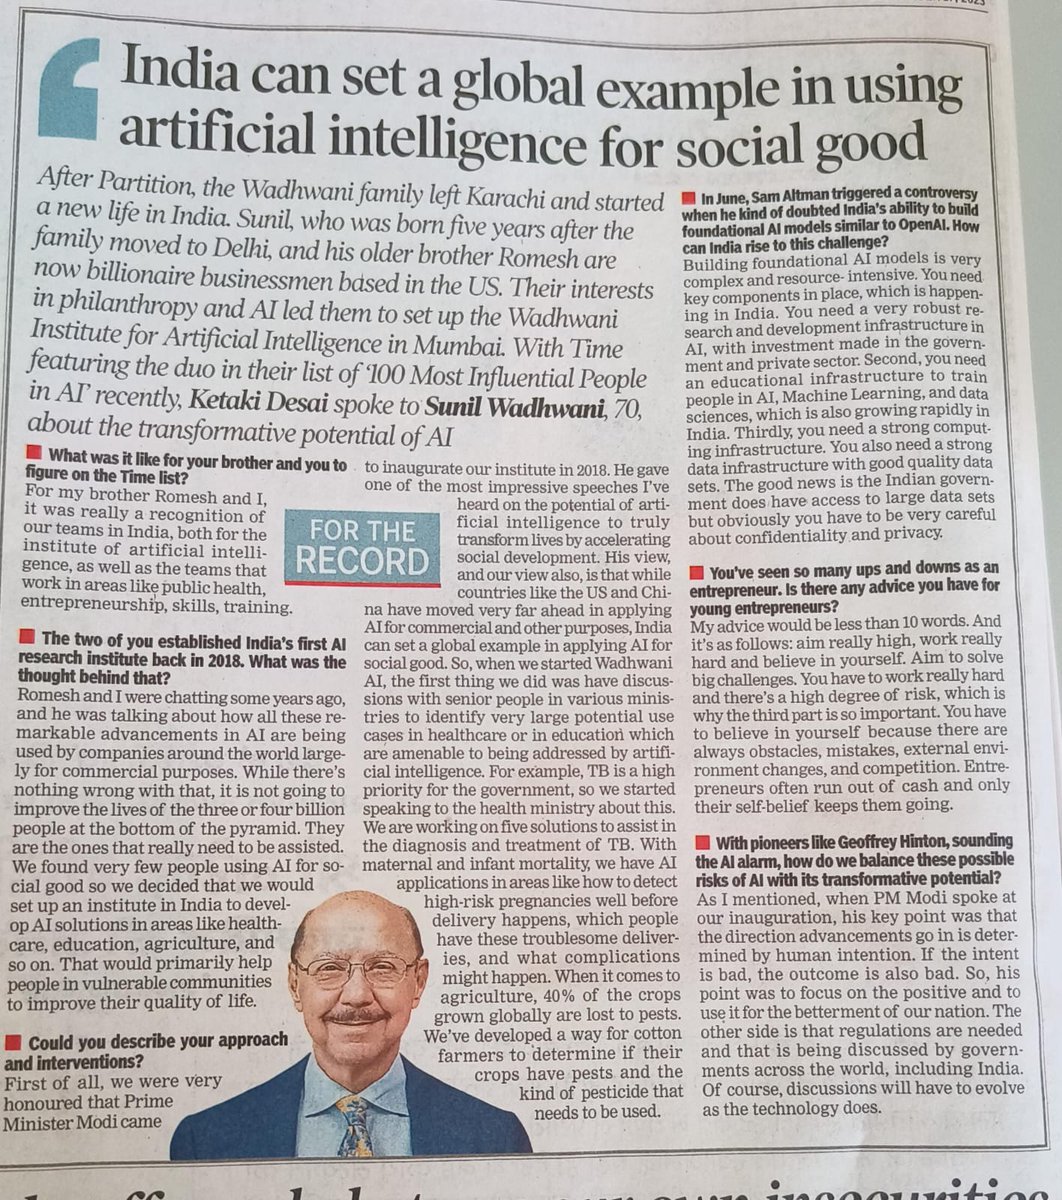 An interview of Mr. Sunil Wadhwani, founder of WISH and co-founder of Wadhwani Institute of AI (alongwith his elder brother Mr Romesh Wadhwani); published in today's ToI. Recently, both featured in the Time Magazine. Very inspiring! @MoHFW_INDIA @PMOIndia @WadhwaniAI @NITIAayog